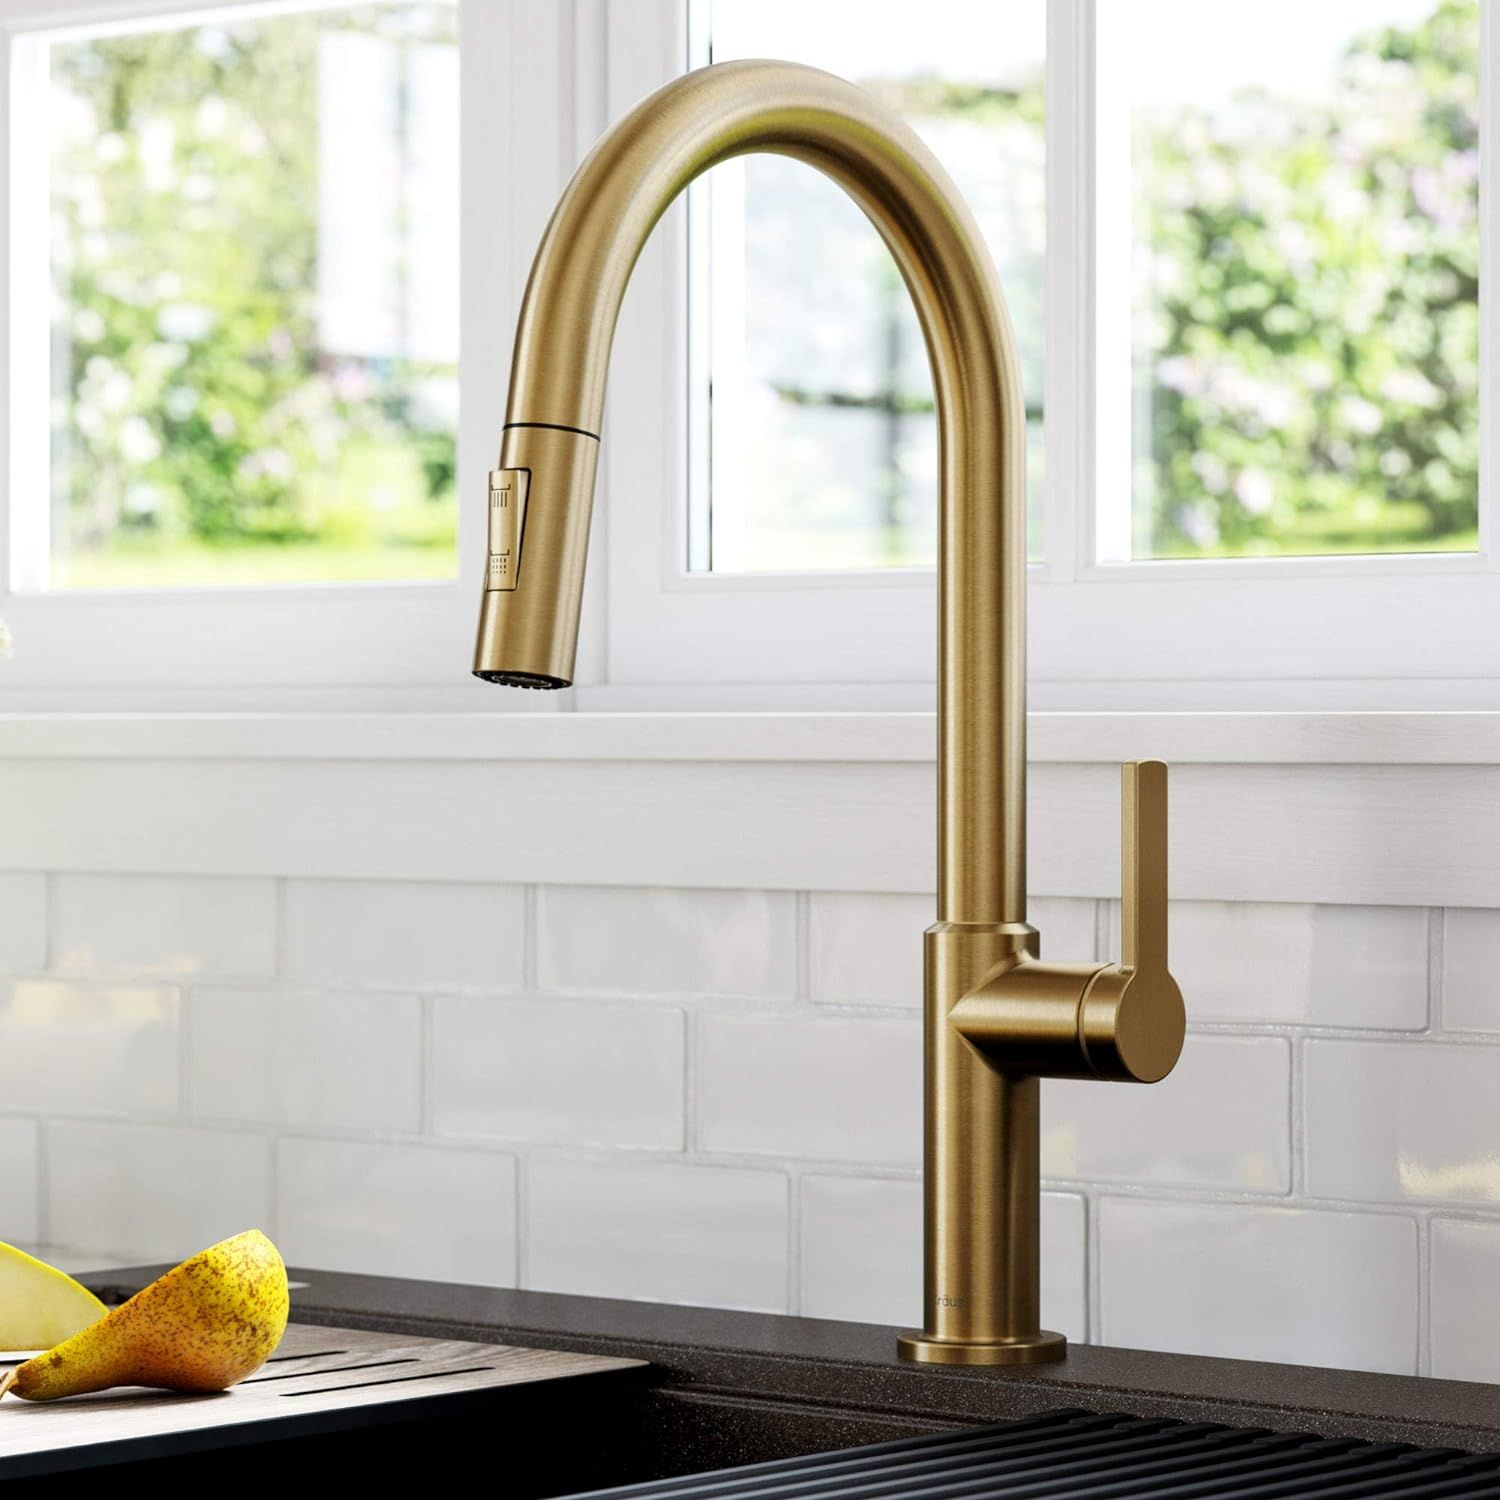 Kraus KPF-2820BB Oletto Single Handle Pull-Down Kitchen Faucet, 17 Inch, Brushed Bronze | Amazon (US)